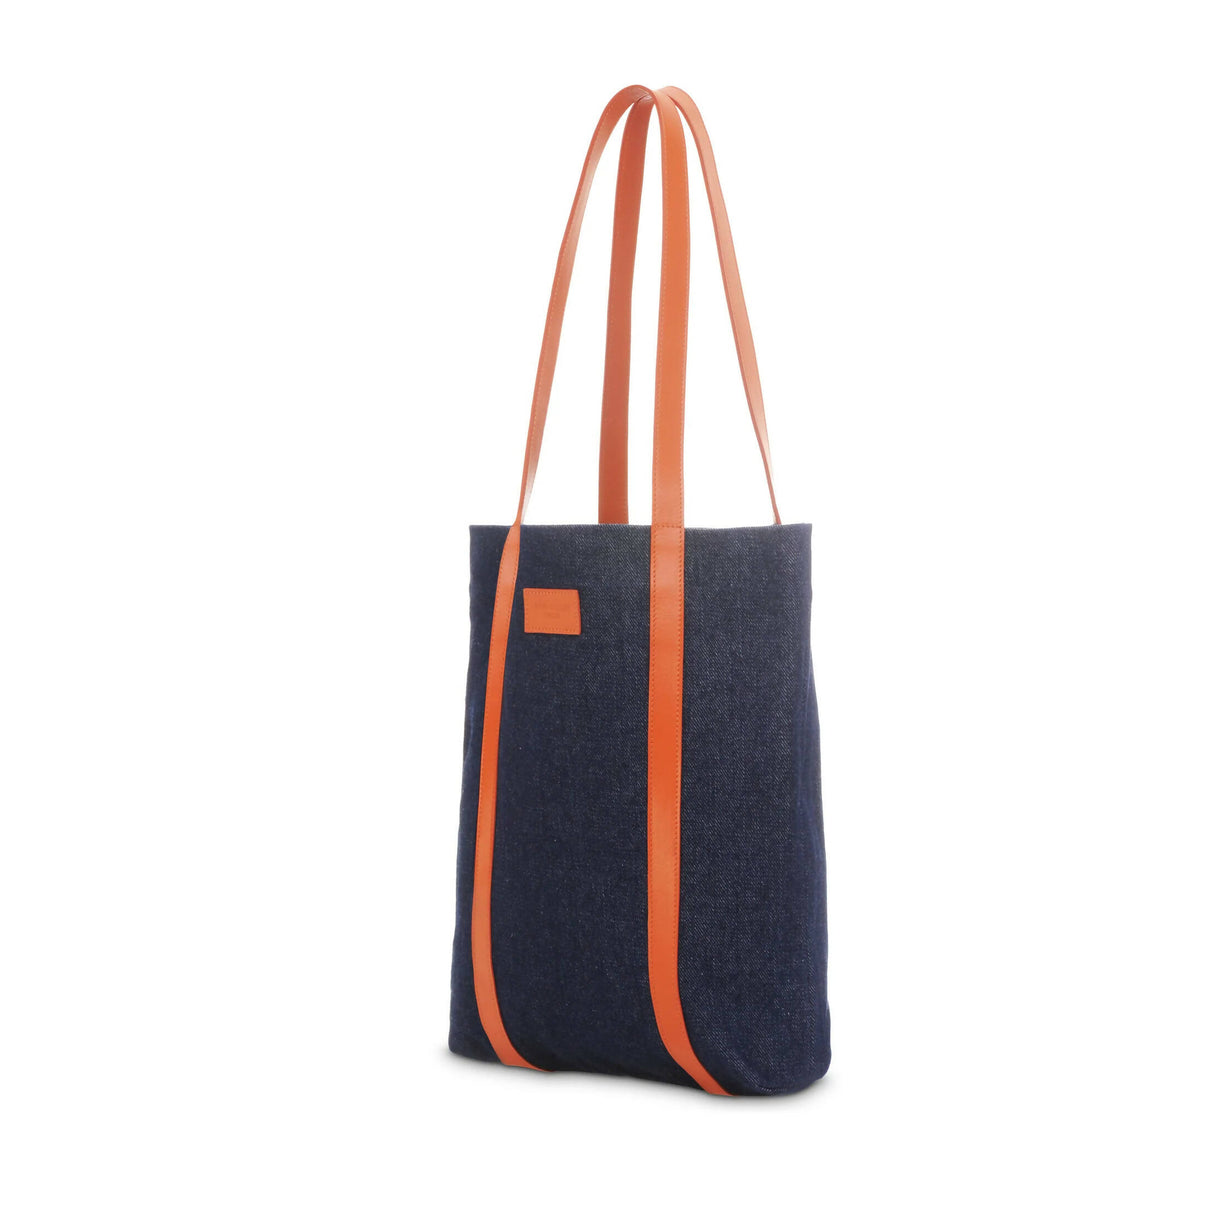 The Tote - Tote bag made from recycled denim with khaki orange finish we